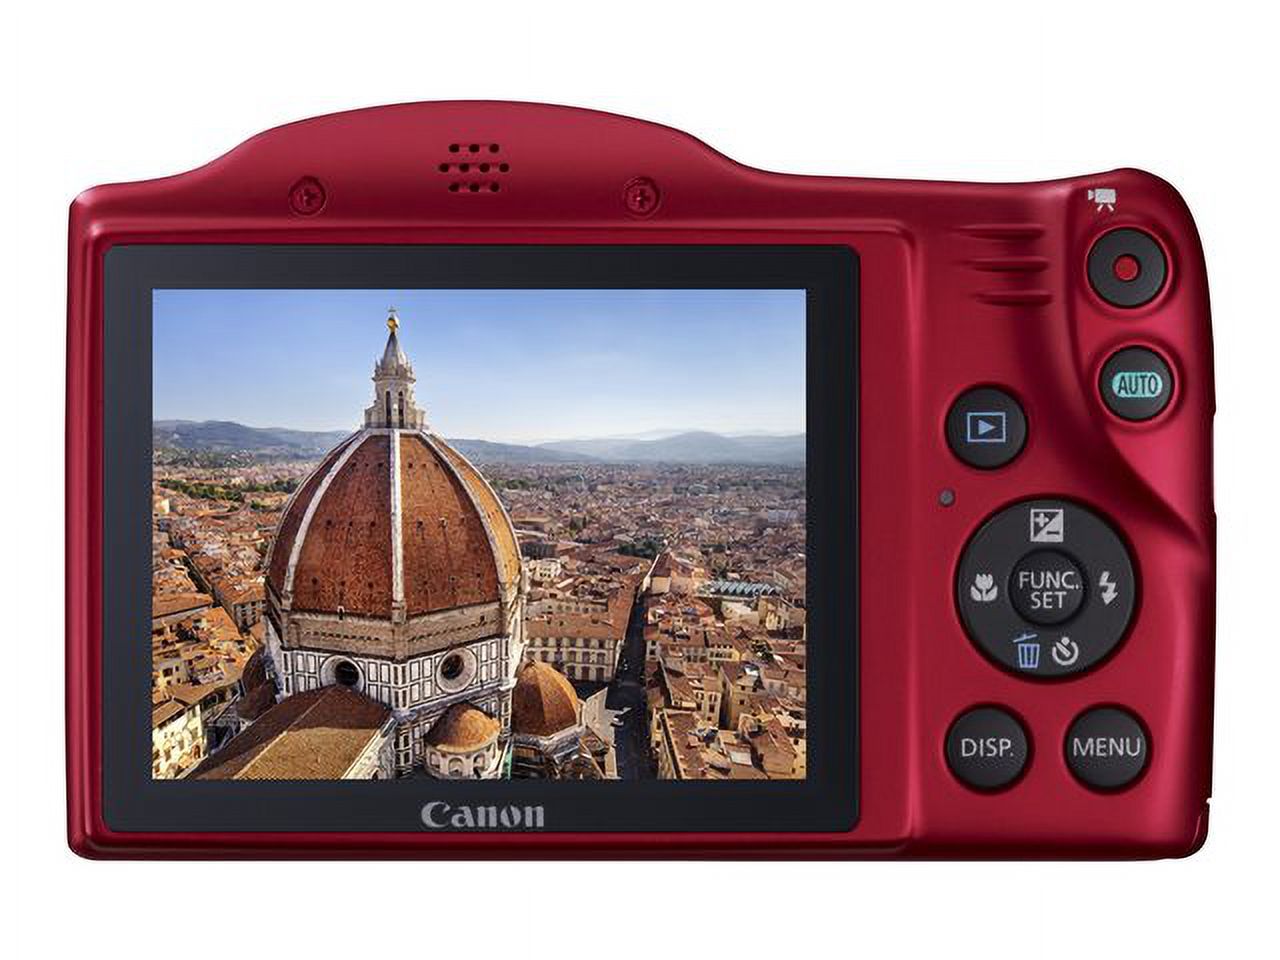 Canon PowerShot SX400 IS - Digital camera - High Definition - compact - 16.0 MP - 30 x optical zoom - red - image 68 of 72